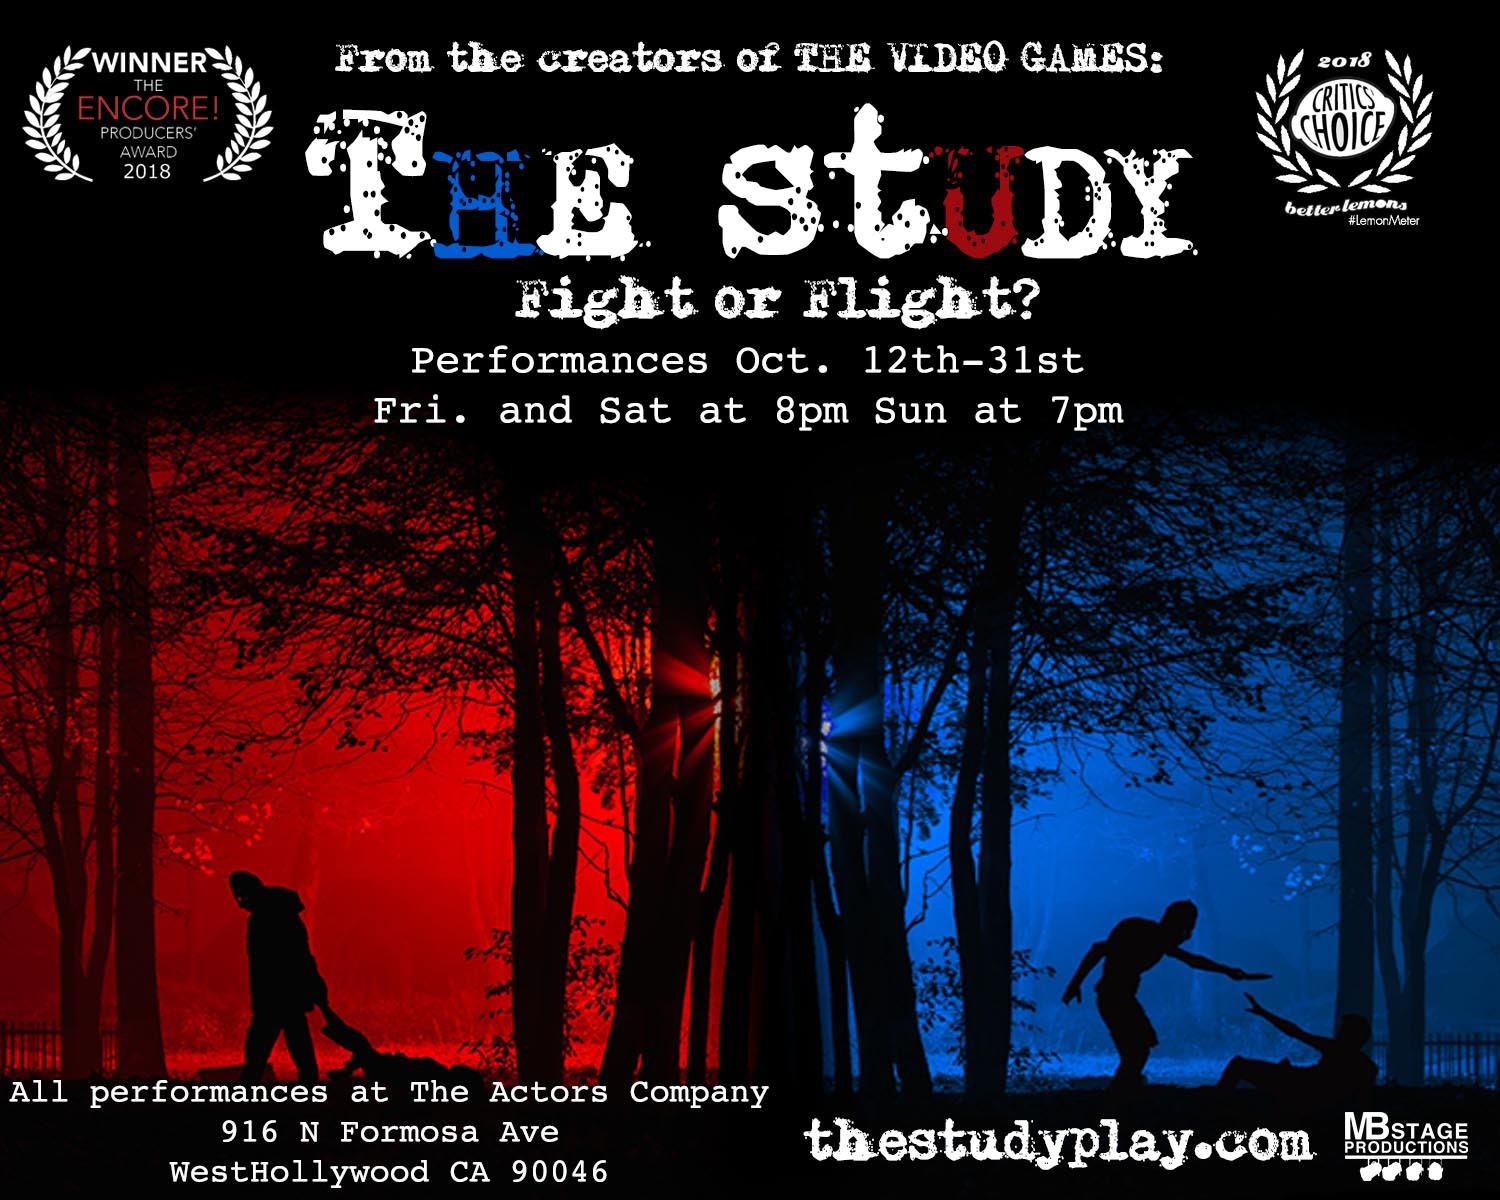 THE STUDY opening for a LIMITED run Oct 12th-31st